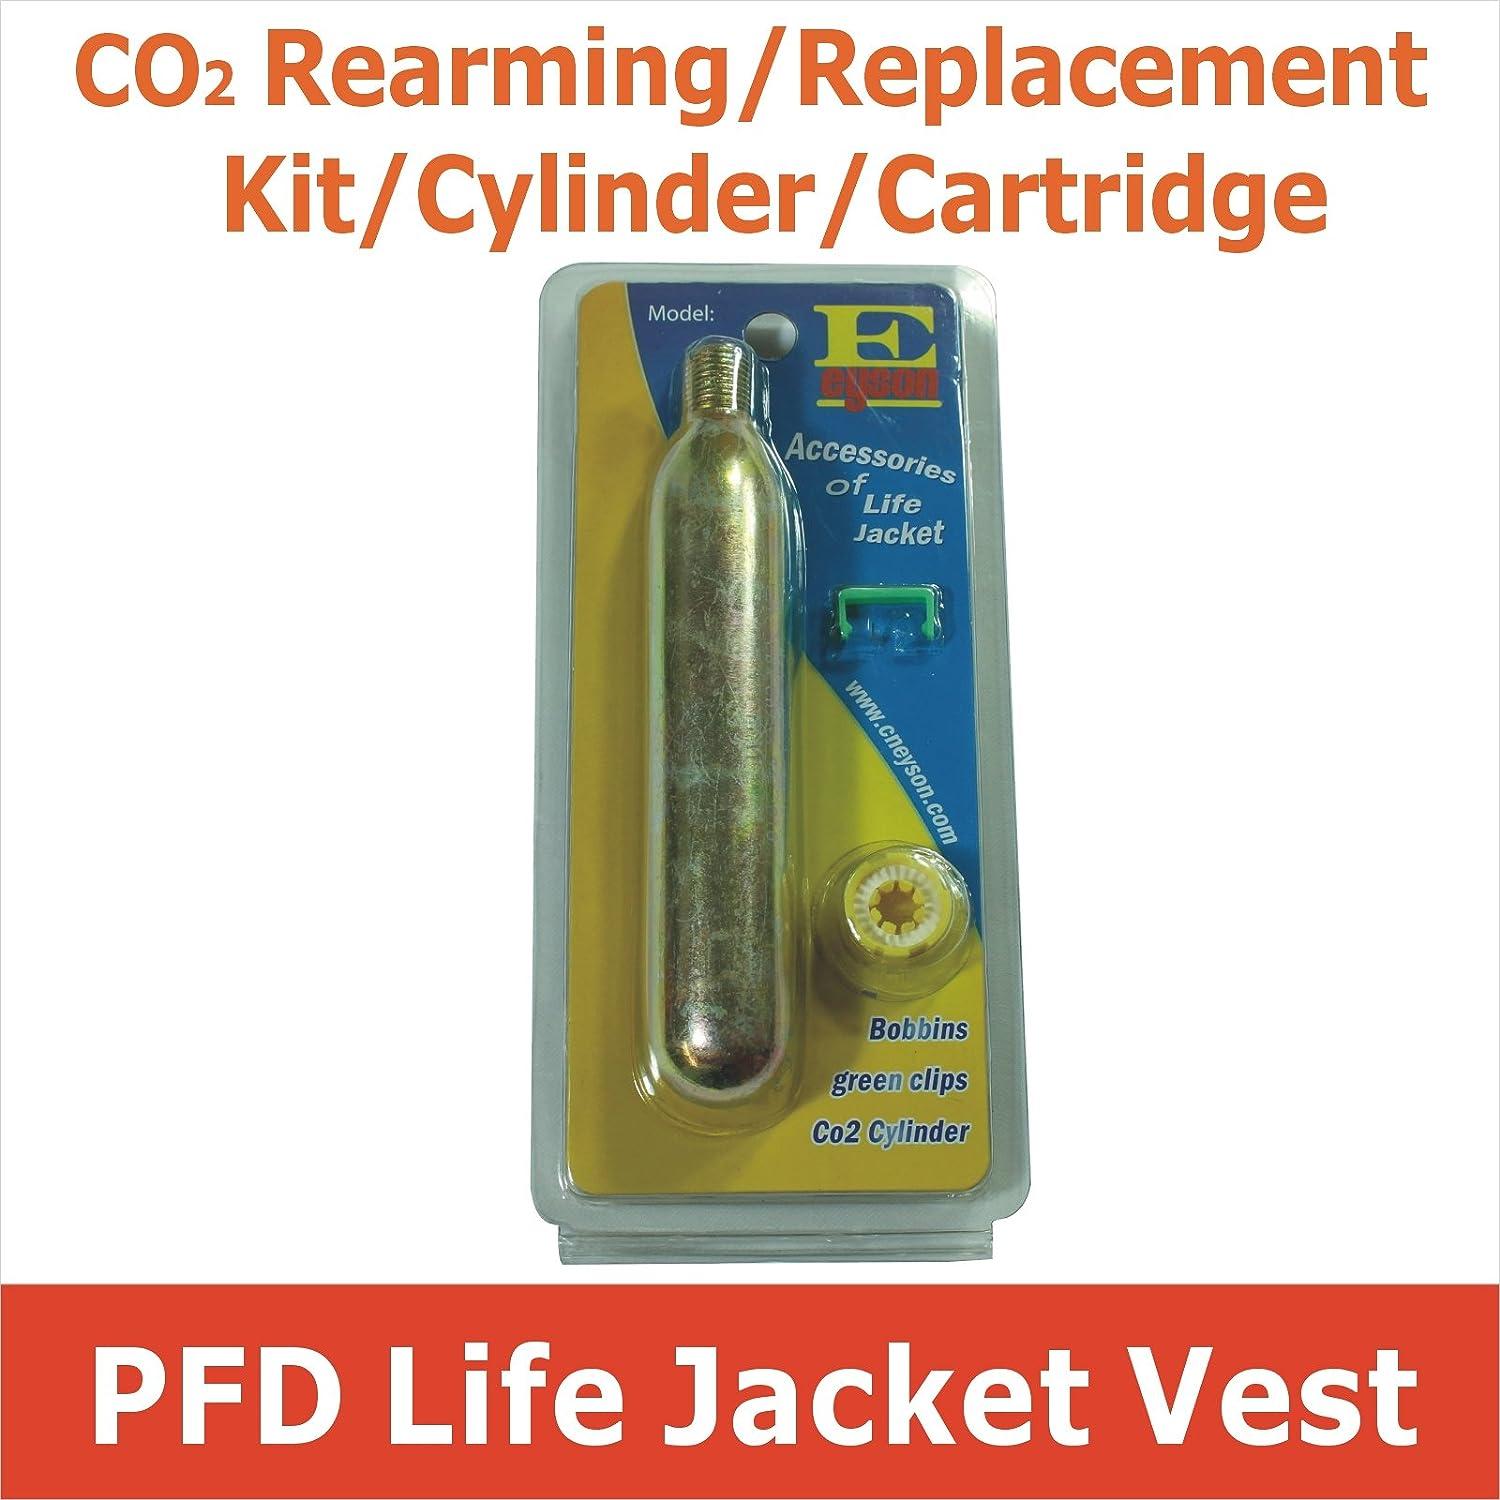 Premium Quality CO2 Rearming Kit Cylinder Cartridge Tank for Automatic/Manual  Inflatable Life Jacket Lifejacket Life Vest Waist Pack Belt Lifesaving PFD  CO2 Replacement Refill New 33-Gram